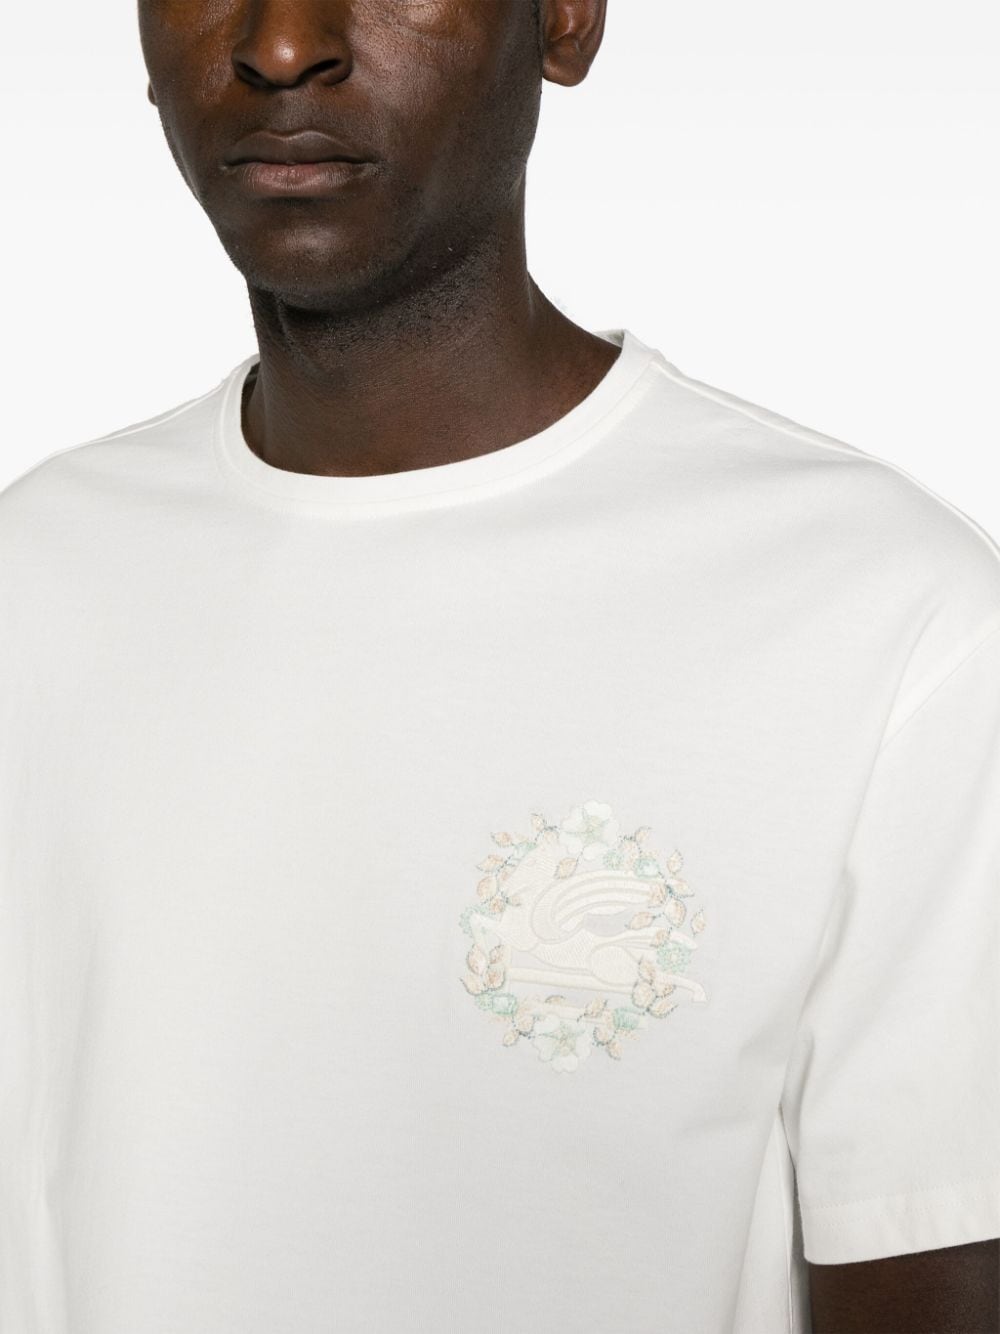 Pegaso-embroidered cotton T-shirt<BR/><BR/><BR/>